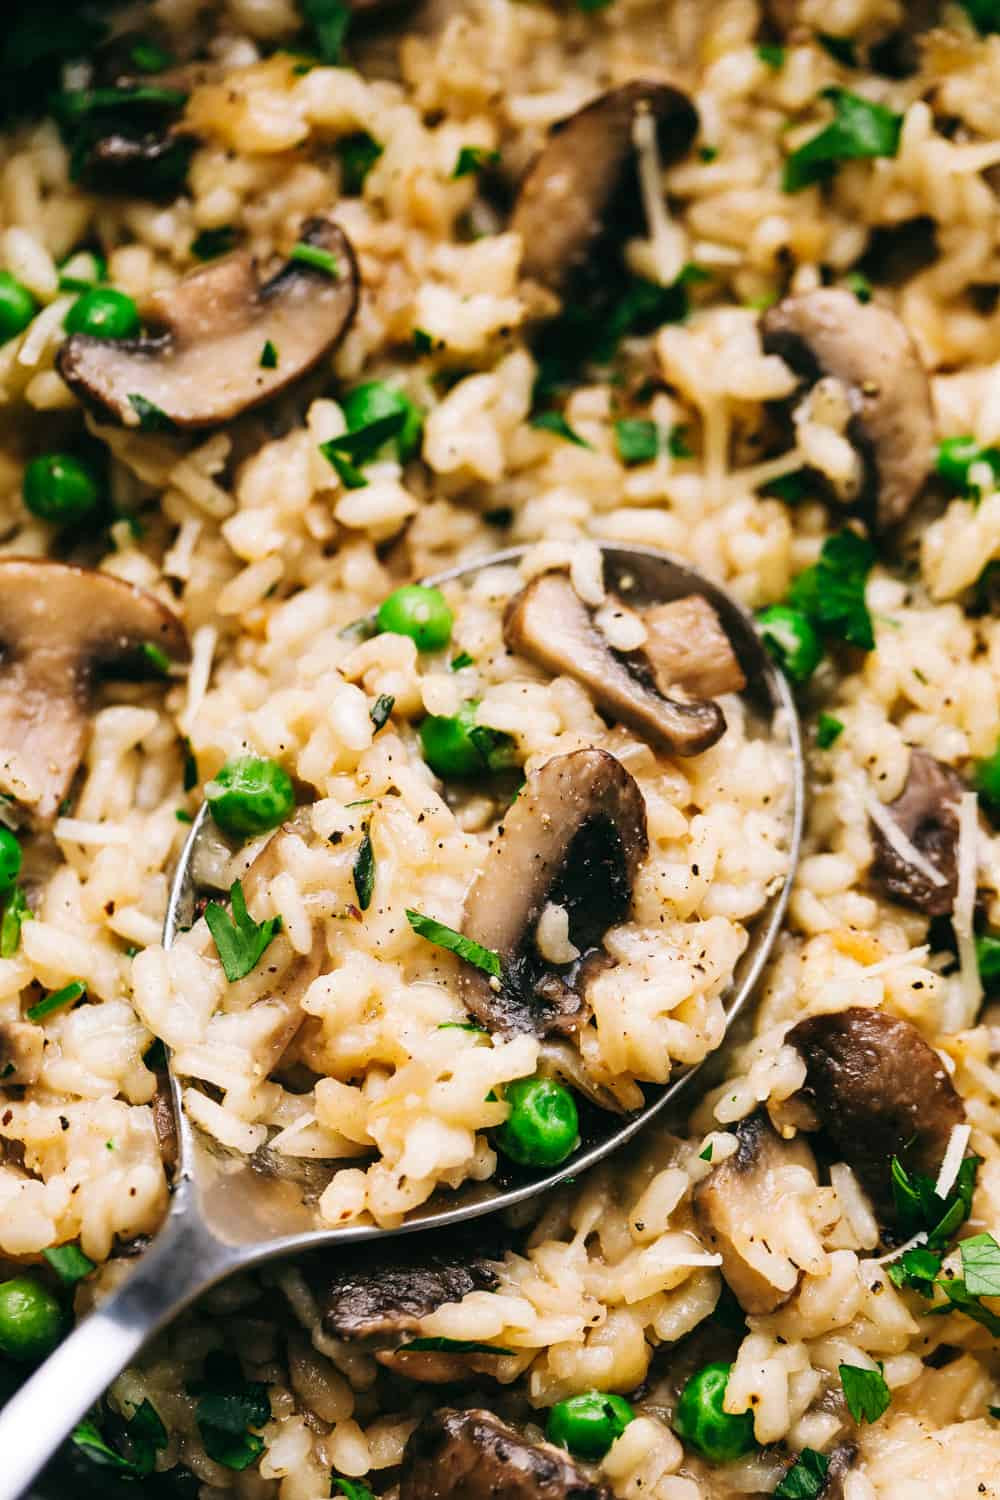 Best Mushroom Risotto Recipe
 How to Make the BEST Mushroom Risotto